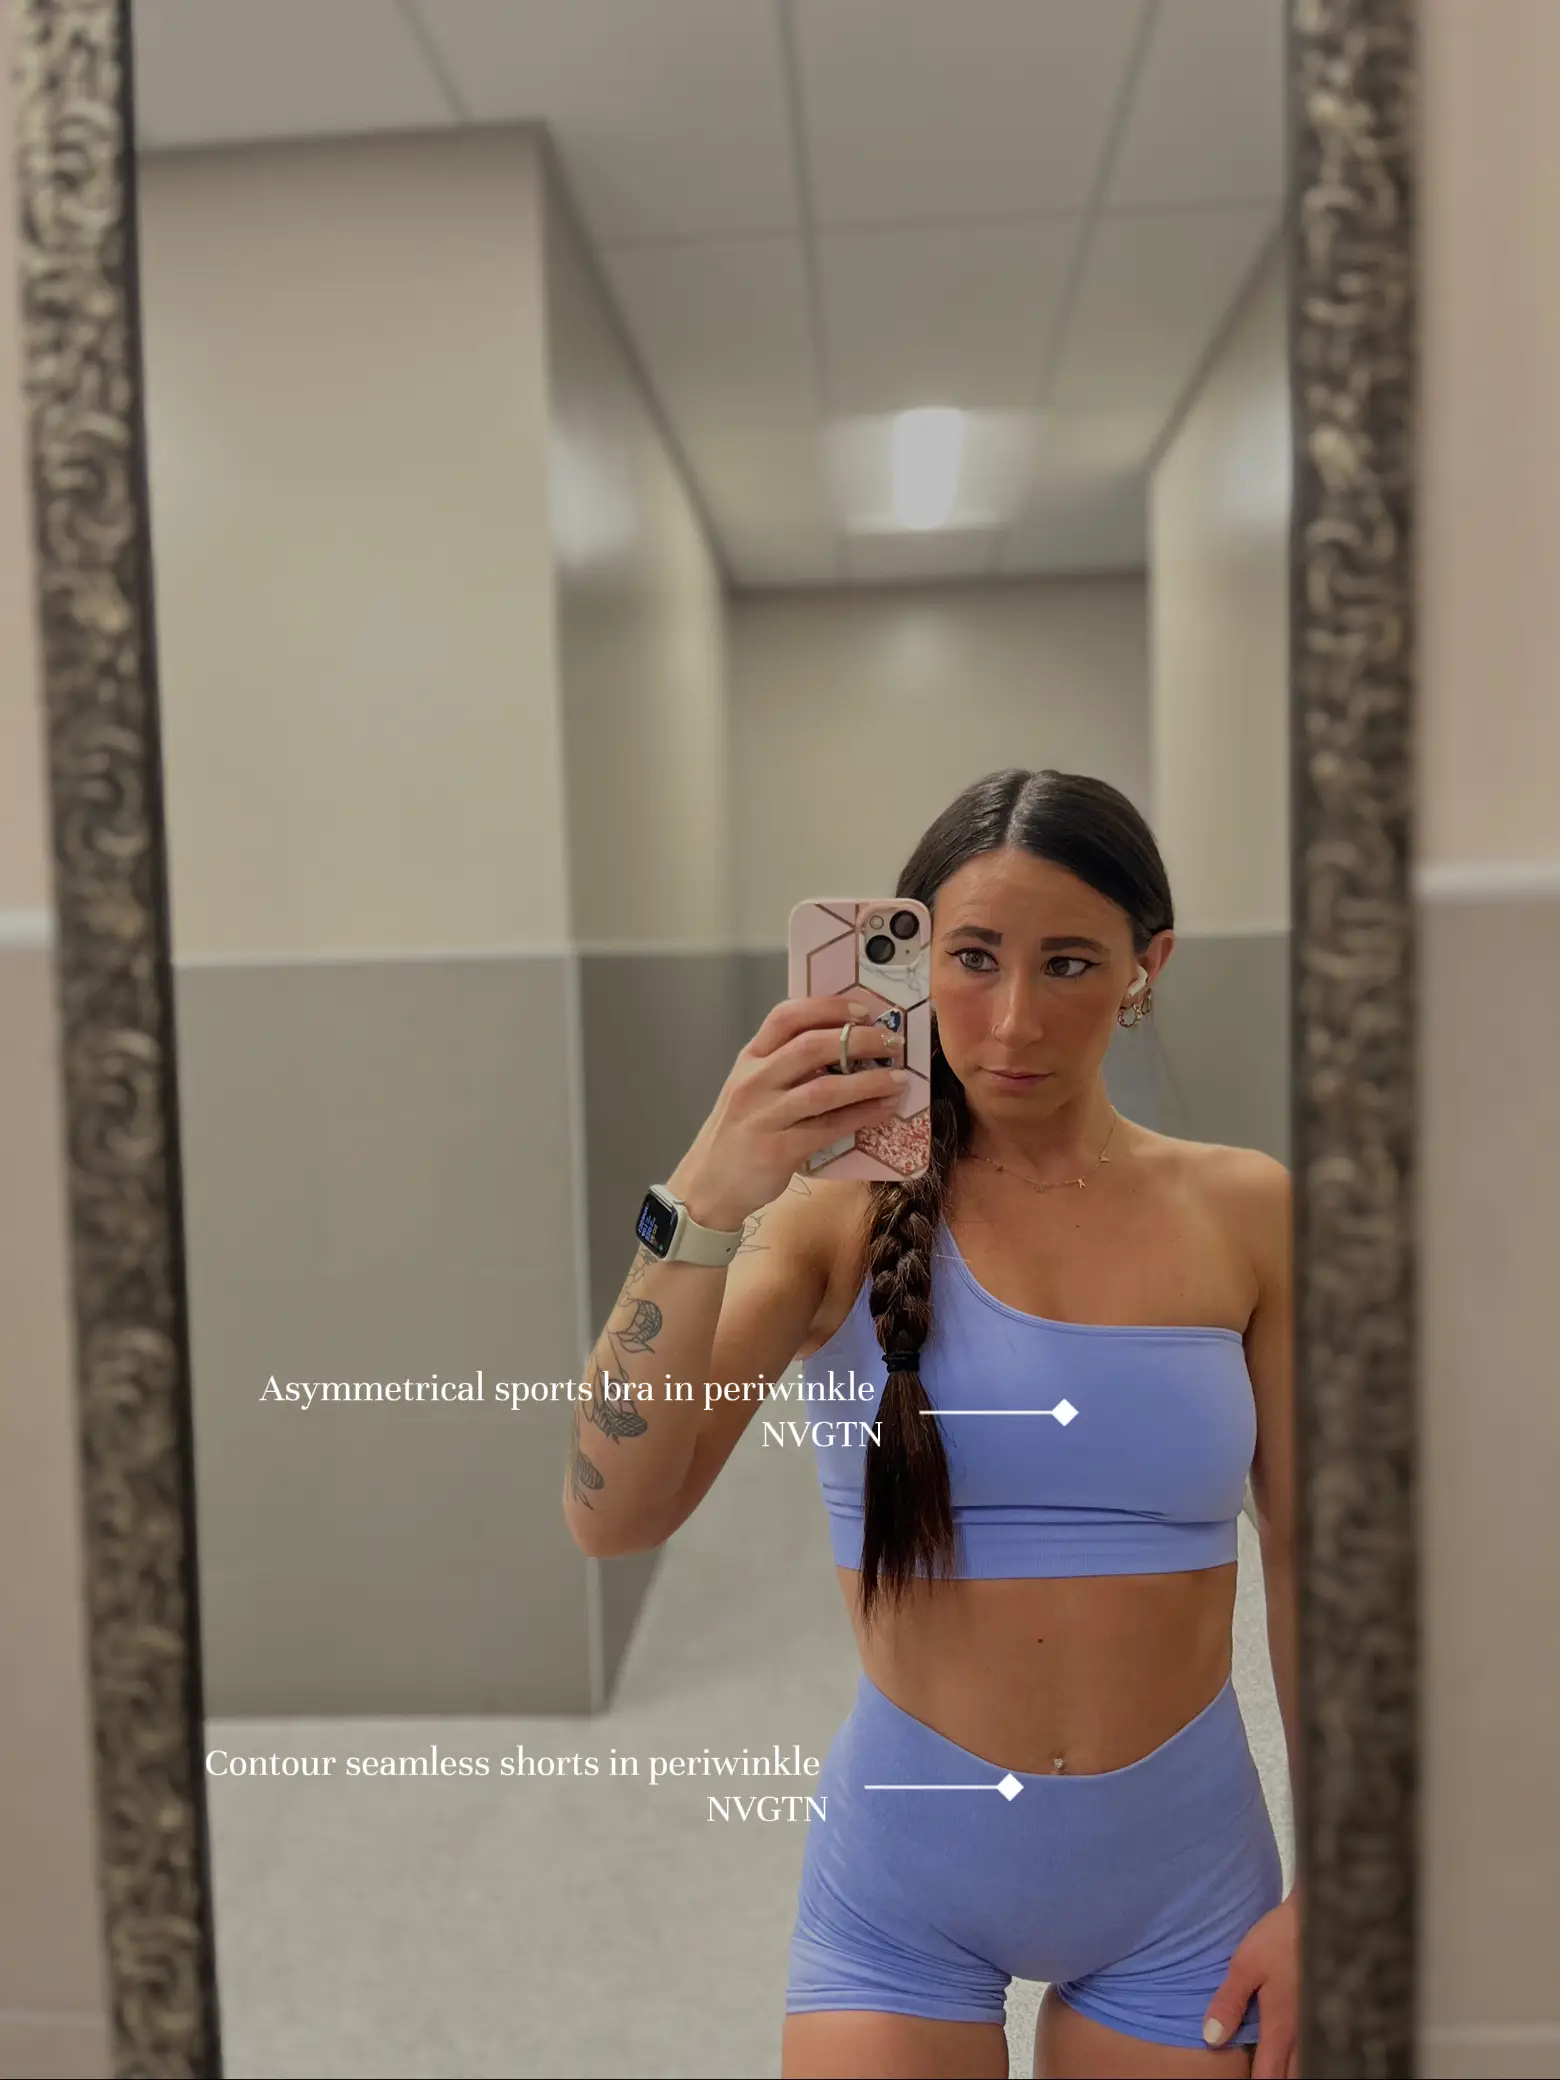 Recent gym fits, Gallery posted by Annafit_